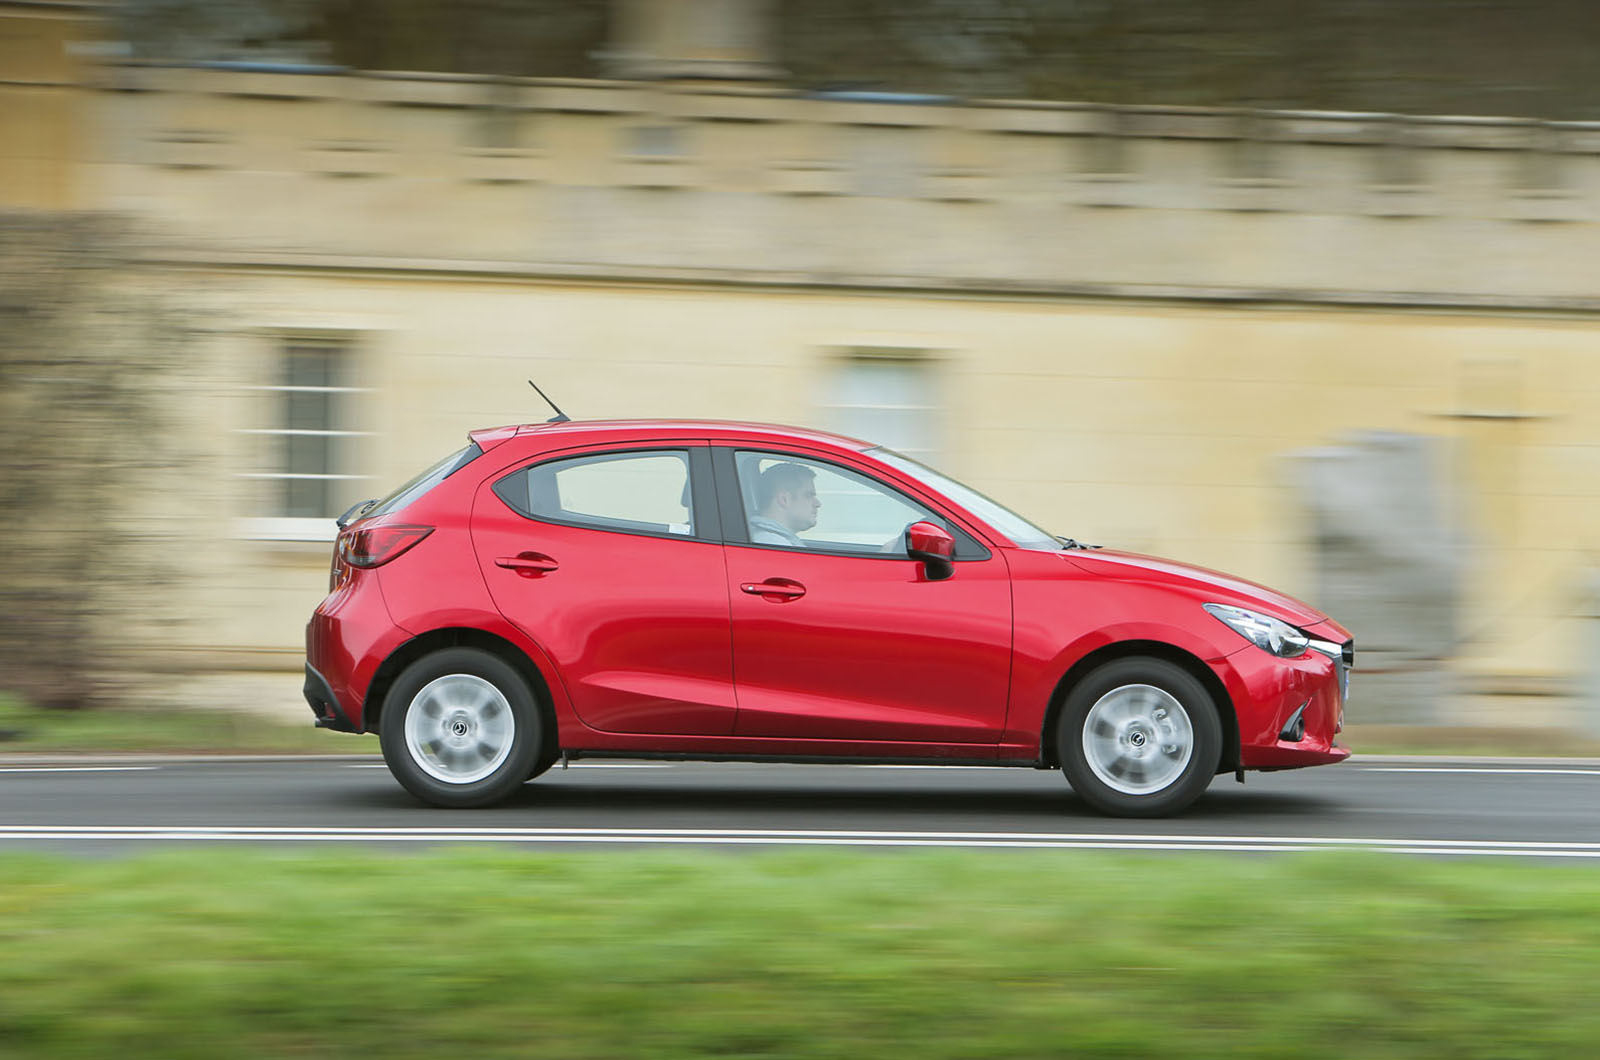 The Mazda 2's fluent handling is matched by a compliant ride